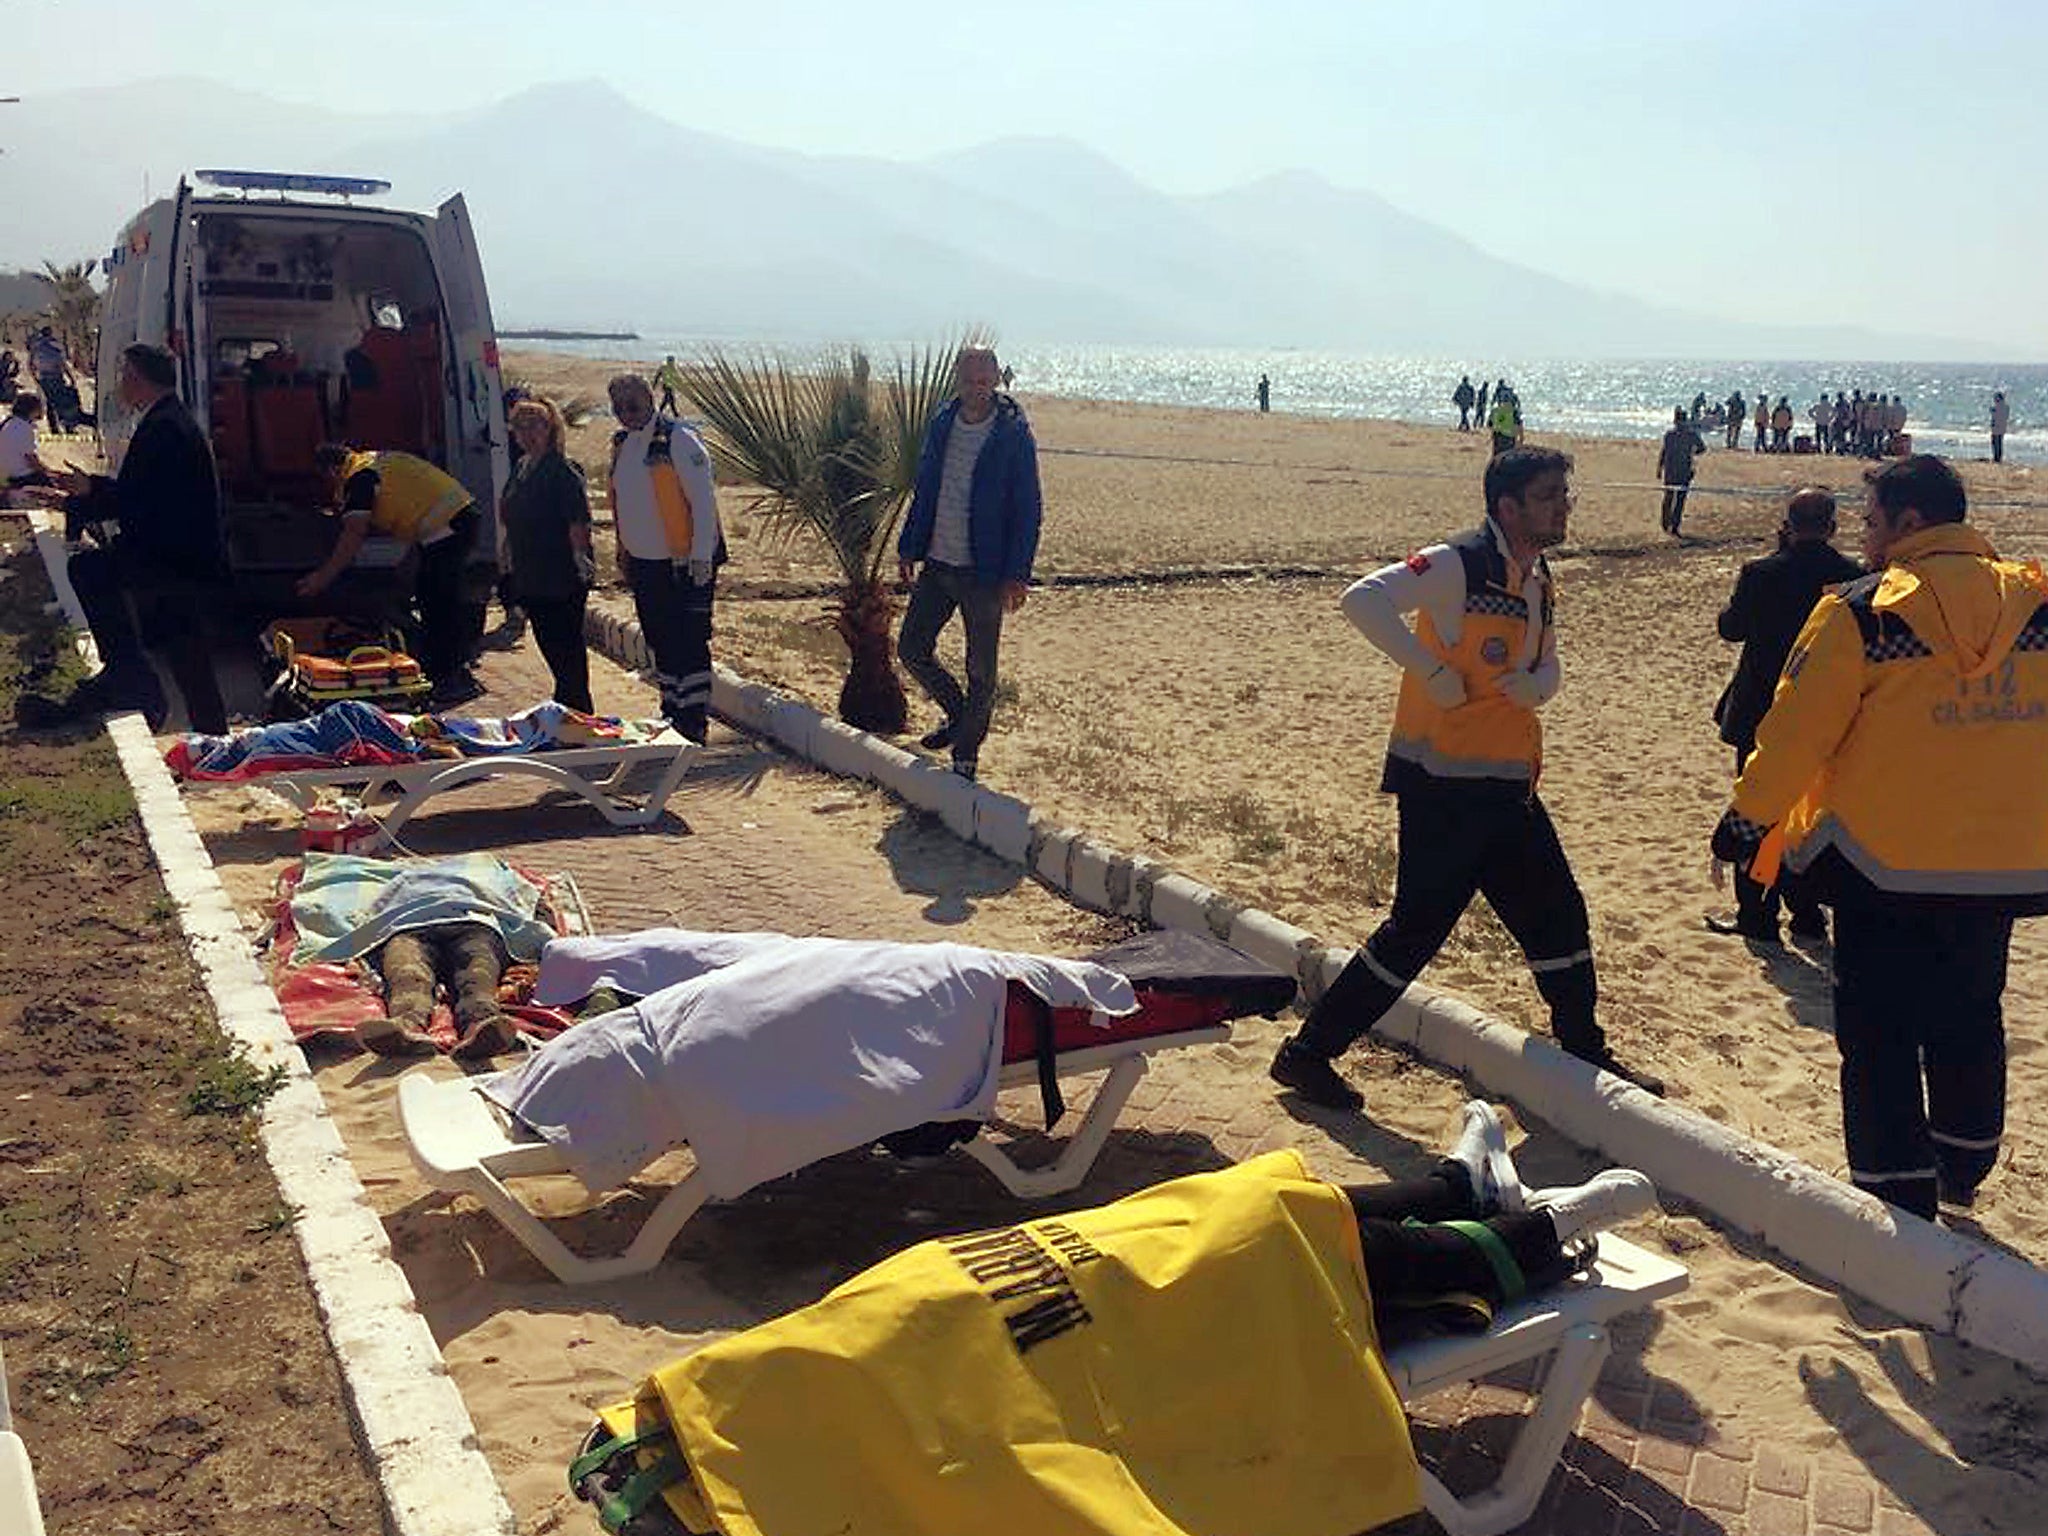 Turkish rescue workers and medics work next to the bodies of migrants laid out near an ambulance in Kusadasi, Turkey